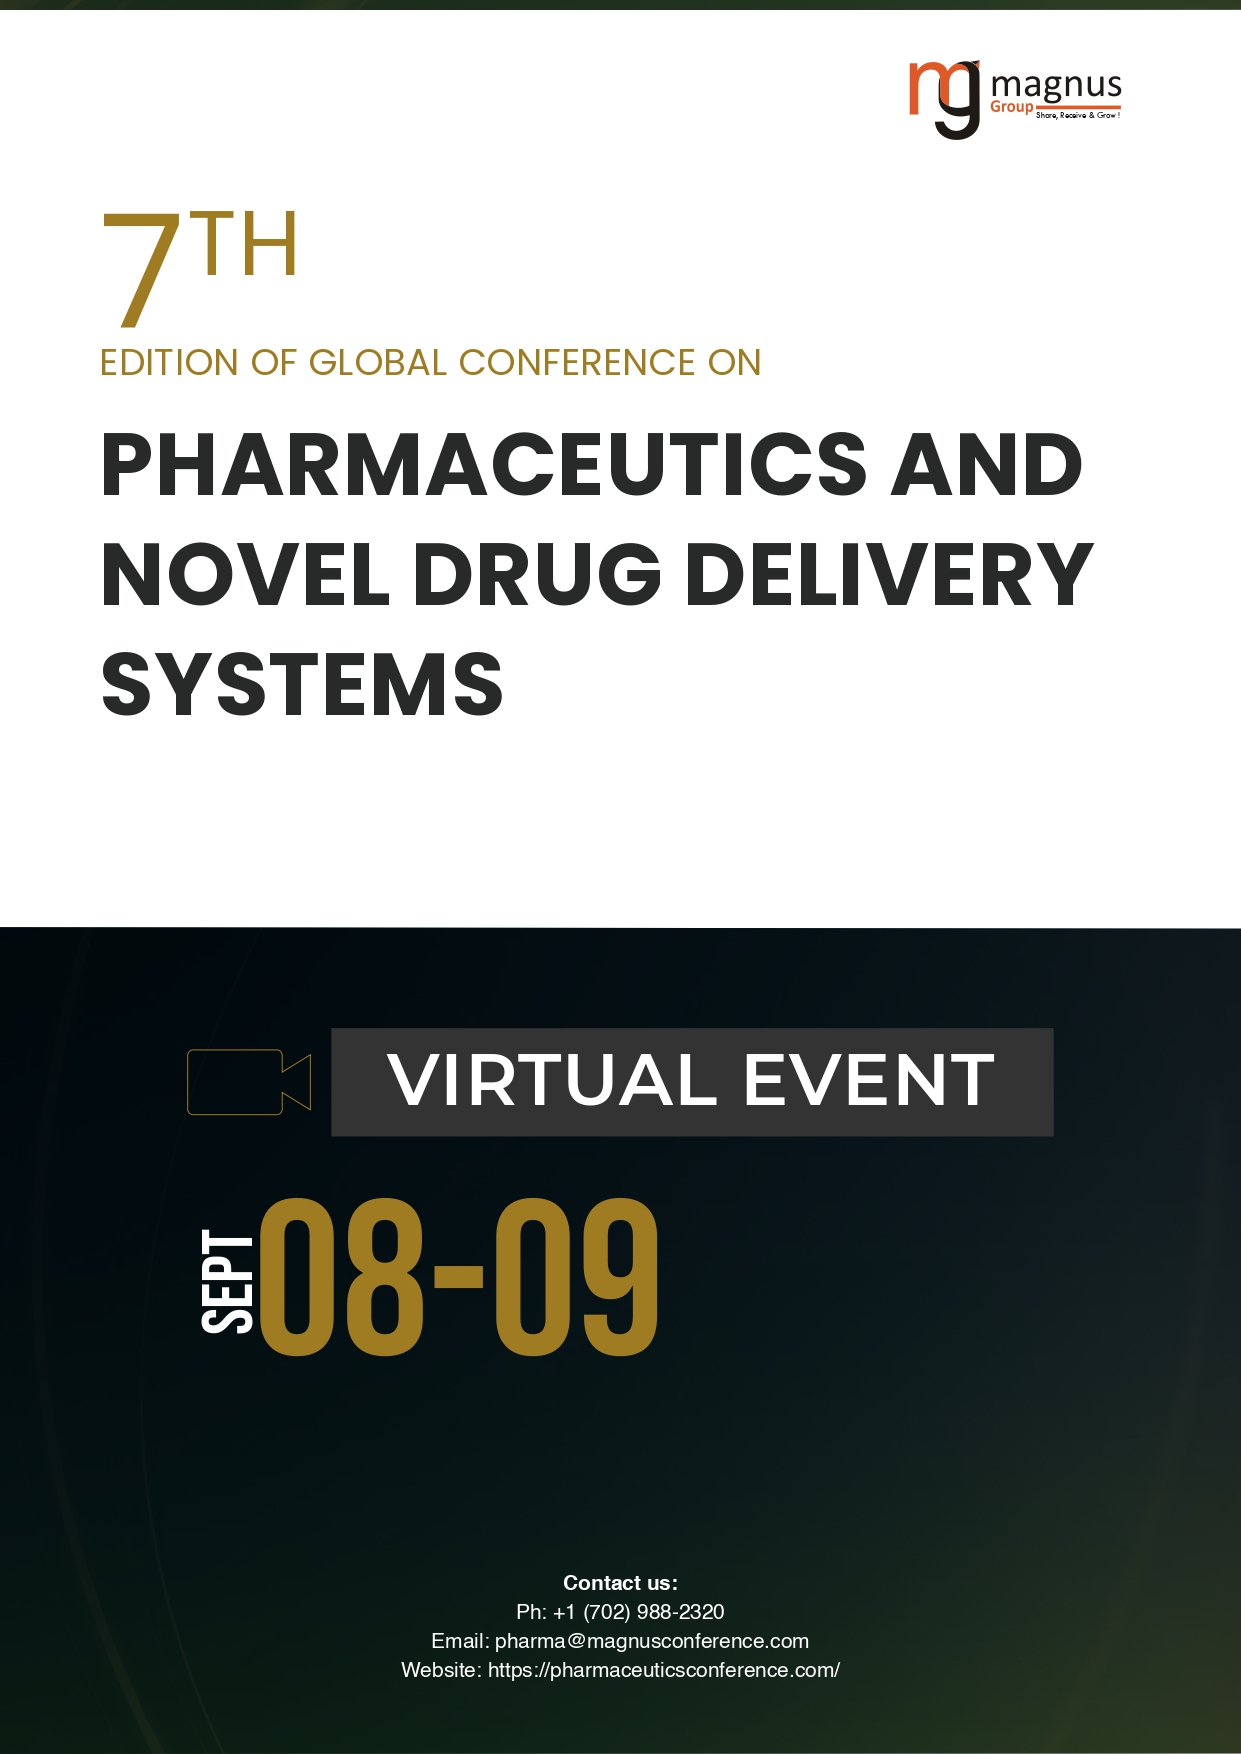 7th Edition of Global Conference on Pharmaceutics and Drug Delivery Systems Book